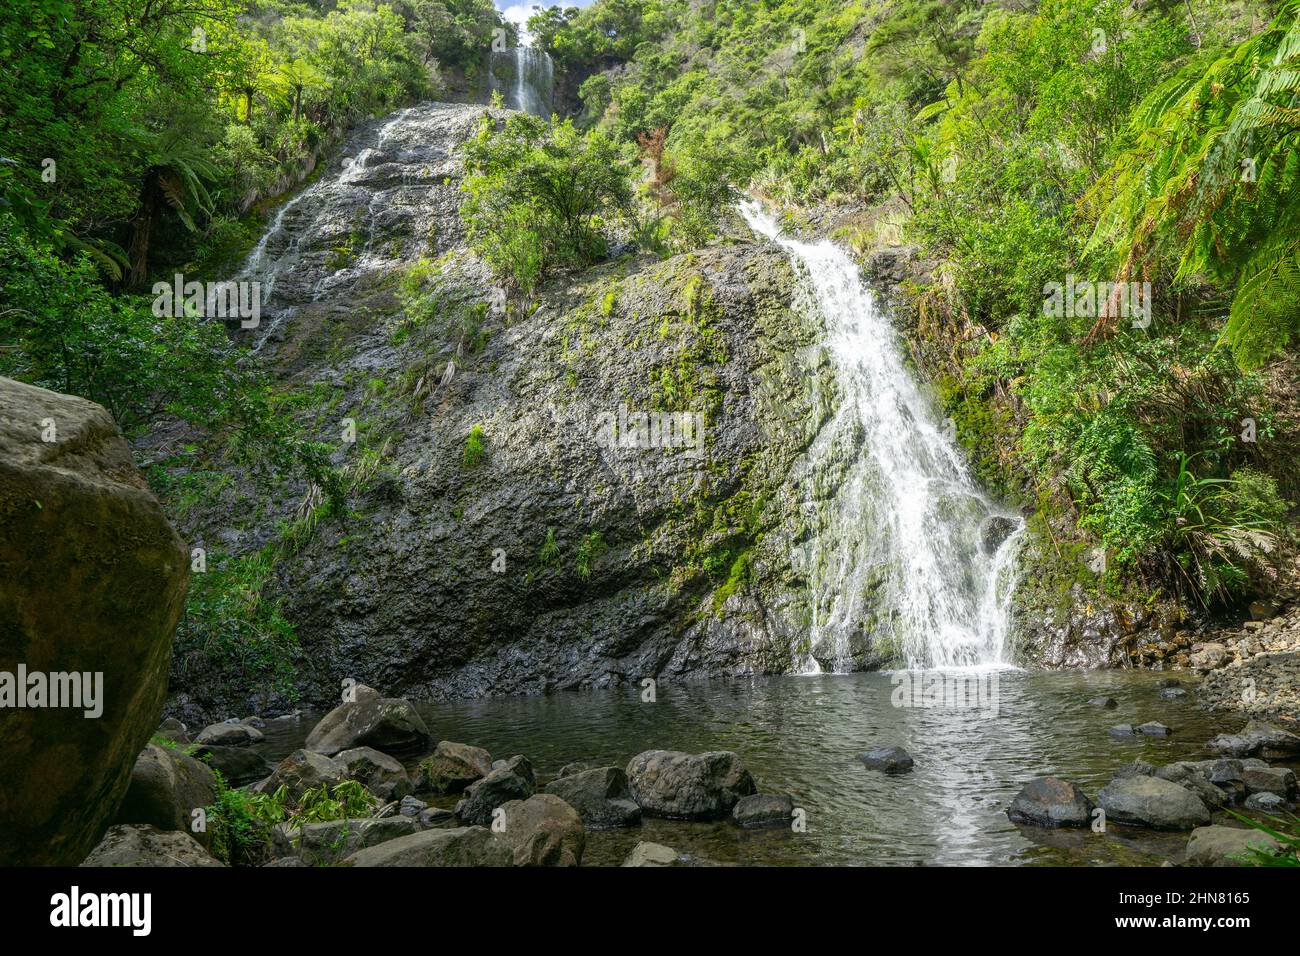 Scenic Waihirere Falls and bush off route 35 around east coast of North Island New Zealand. Stock Photo